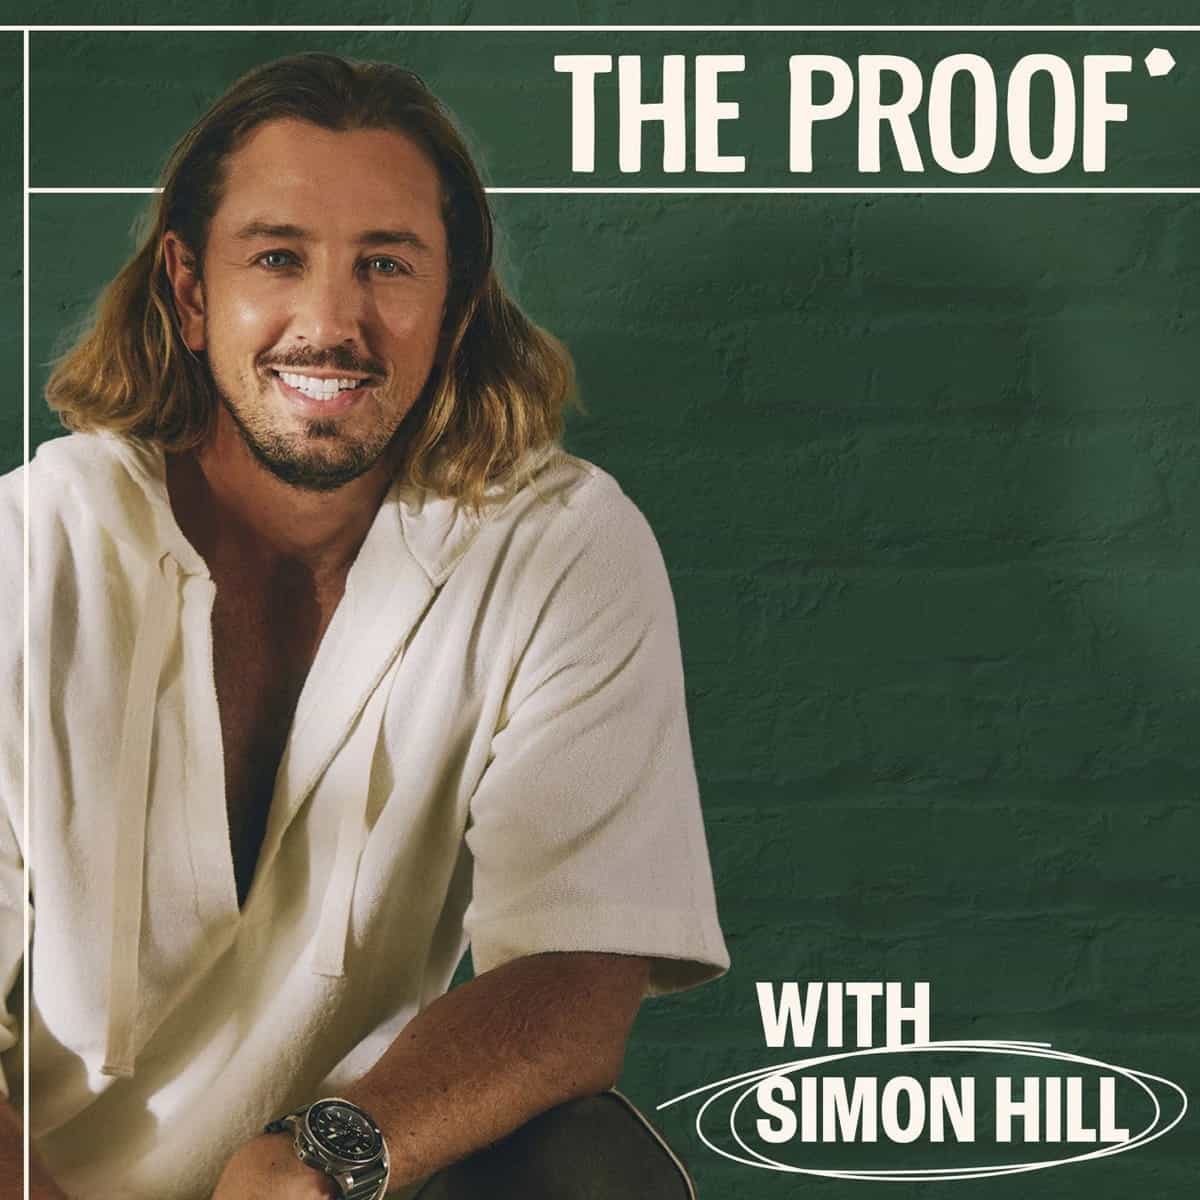 The Proof podcast with host Simon Hill podcast cover art.